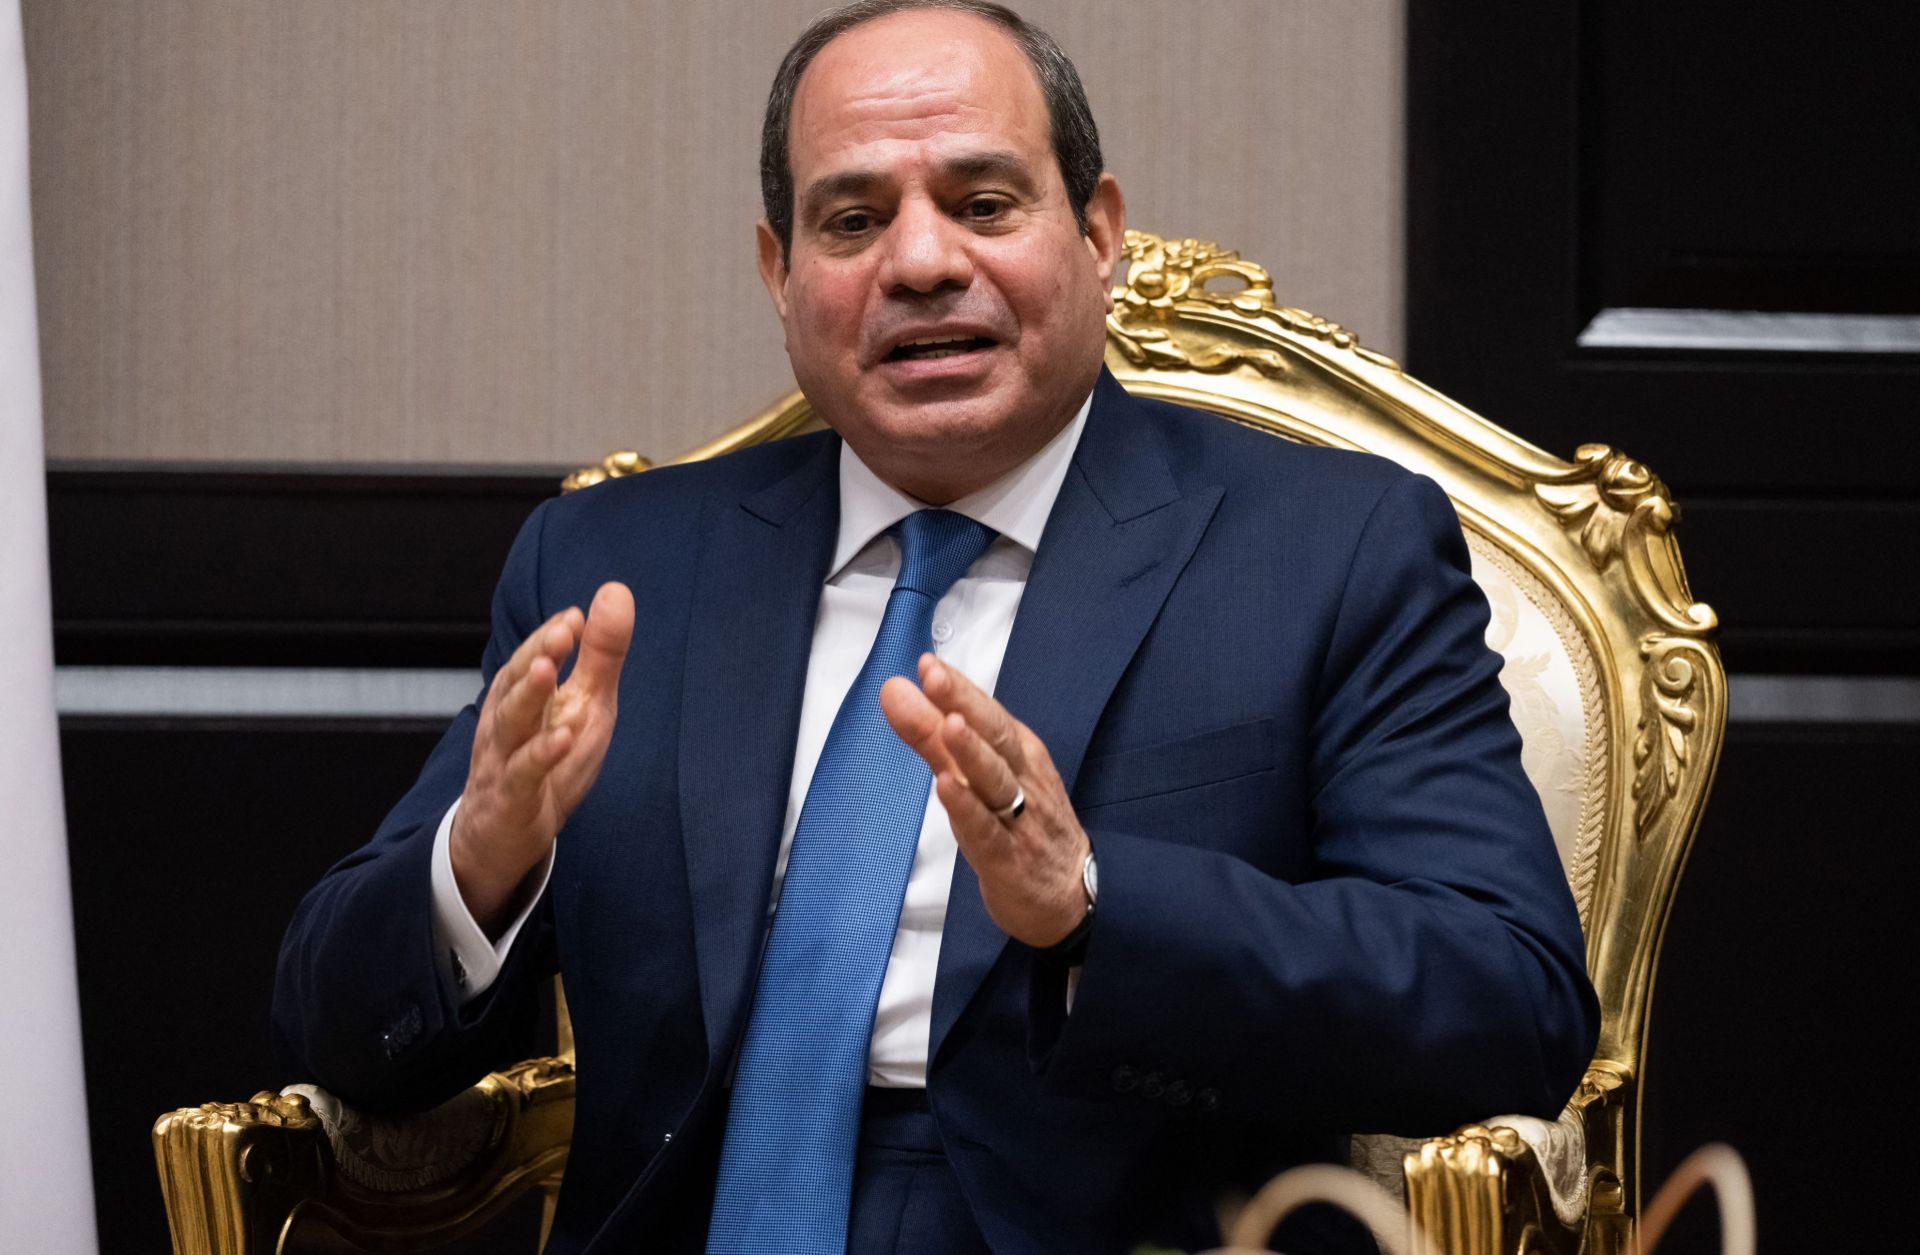 Egyptian President Abdel Fattah al-Sisi is seen on the sidelines of the COP27 summit on Nov. 11, 2022.